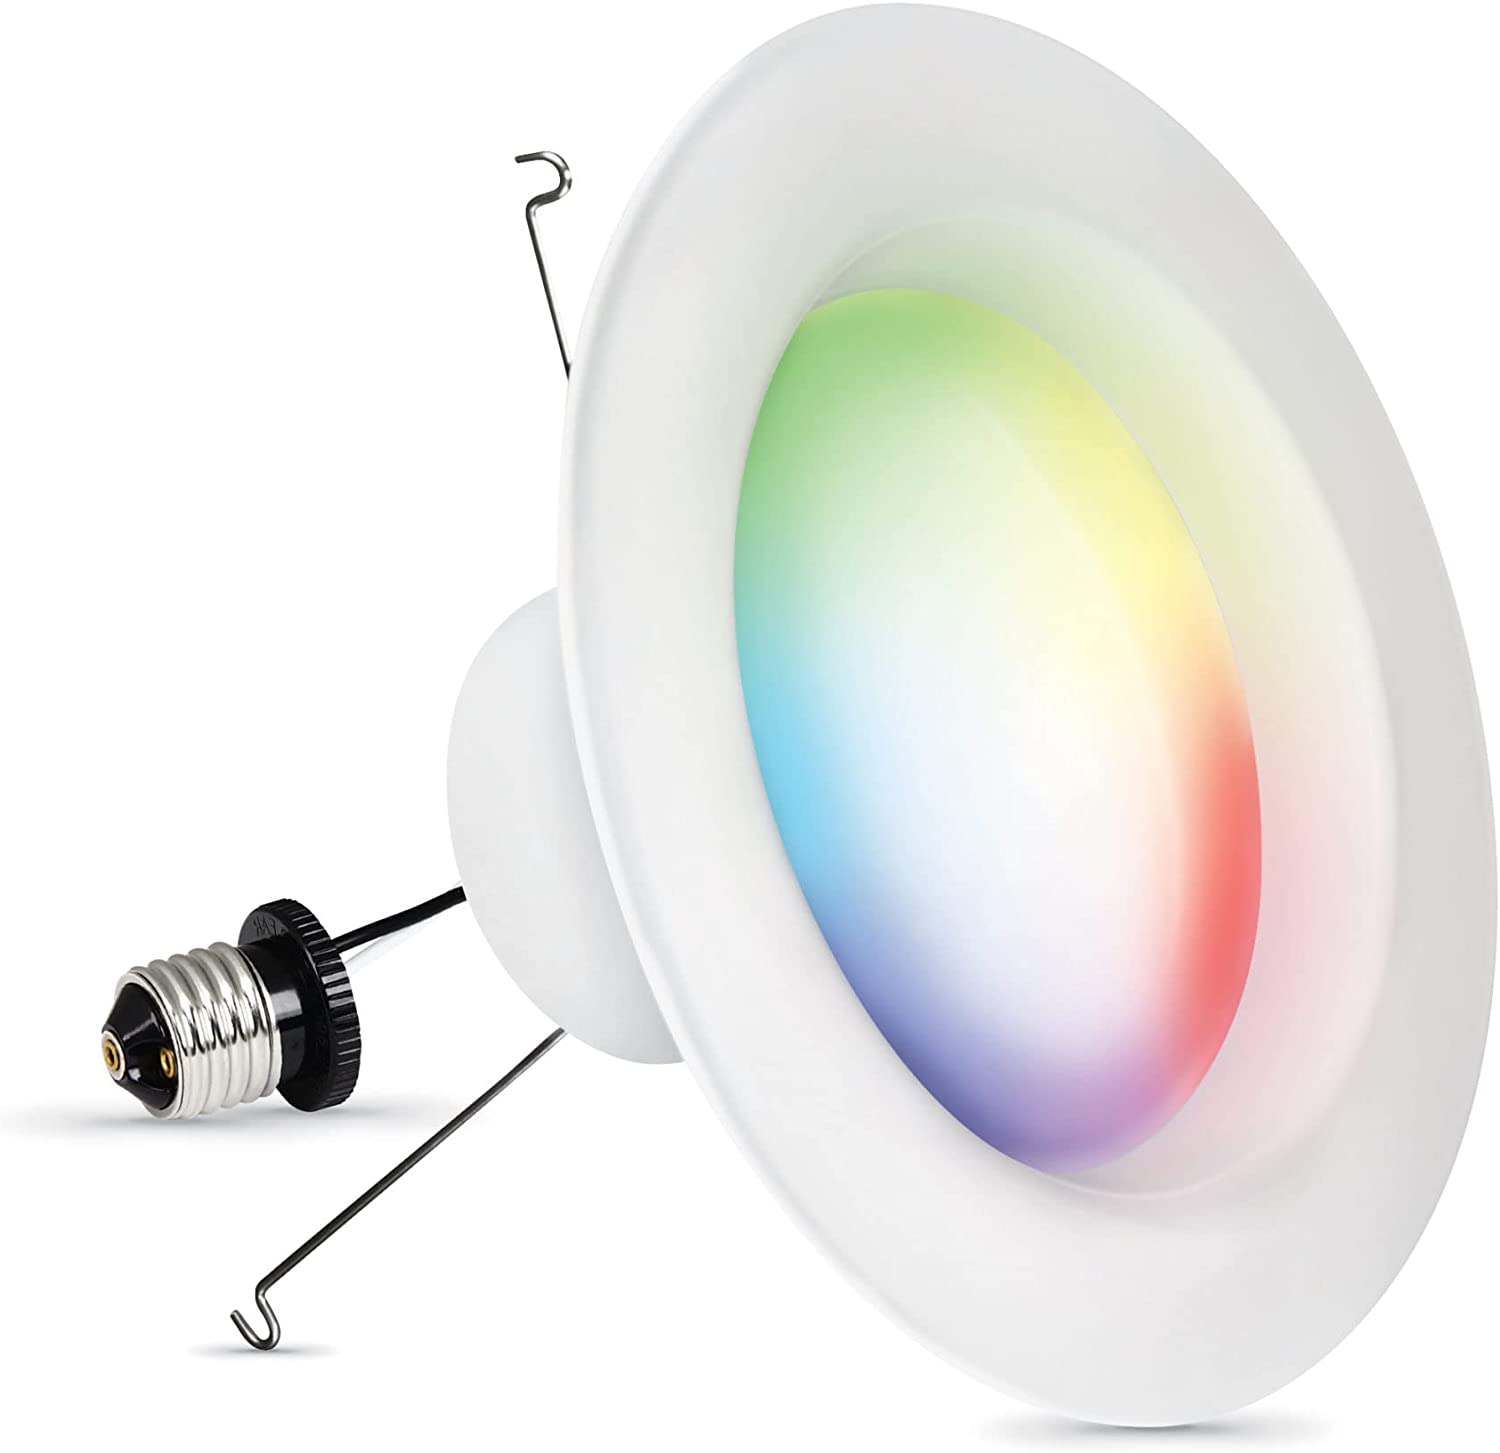 Feit Electric LEDR6/RGBW/AG 75 Watt Equivalent 2.4GHz WiFi Color Changing and Tunable White, Dimmable, No Hub Needed, Alexa or Google Assistant RGBW Multicolor LED Smart Downlight, 6 Inch Recessed